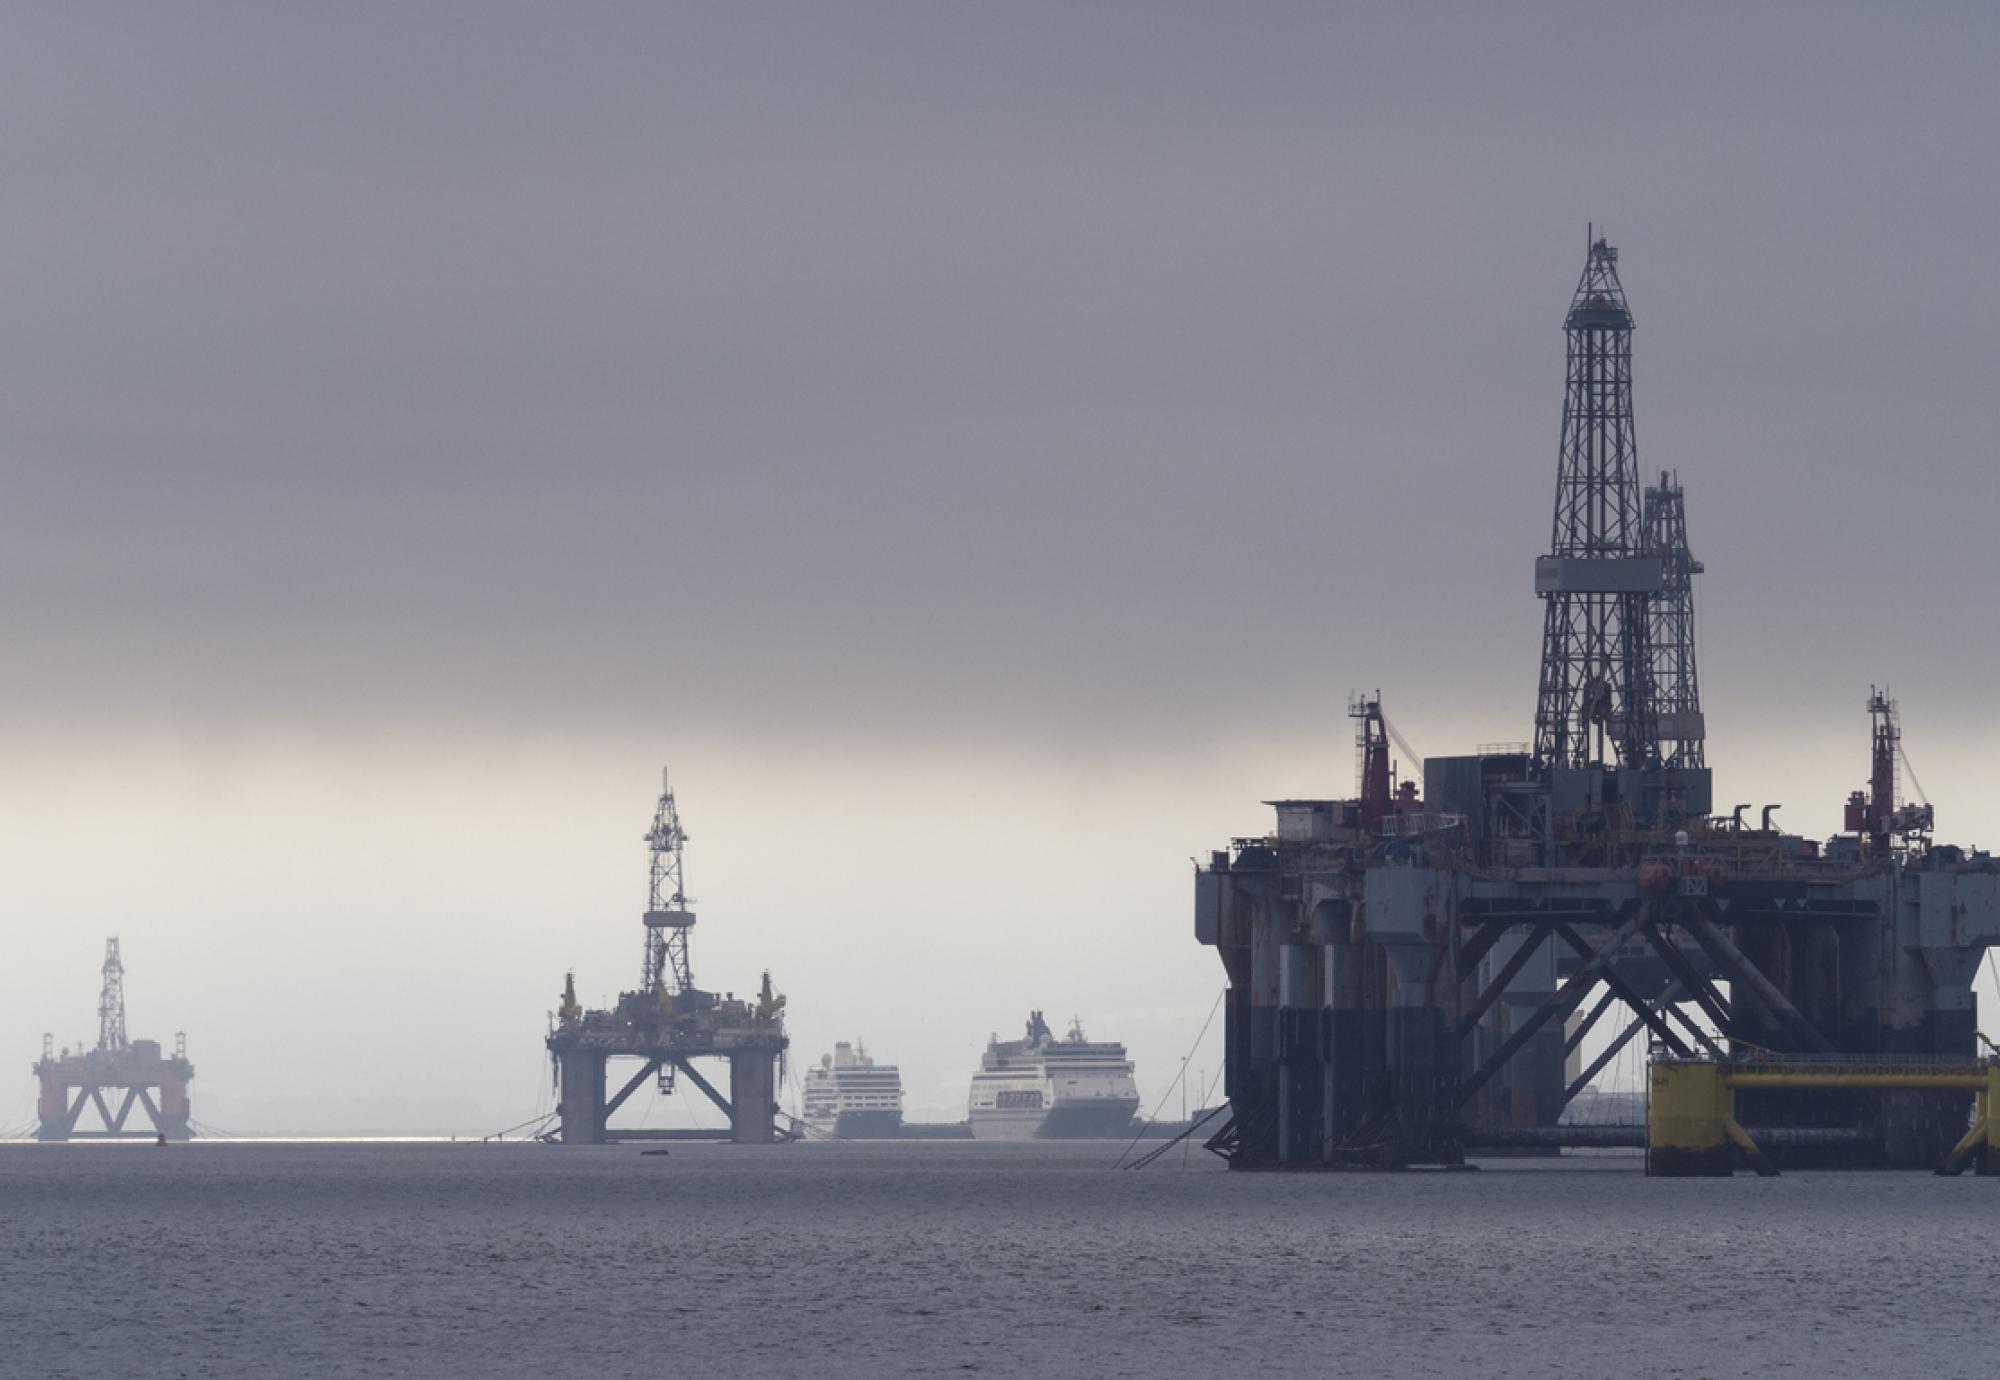 Image of oil rigs in the North Sea